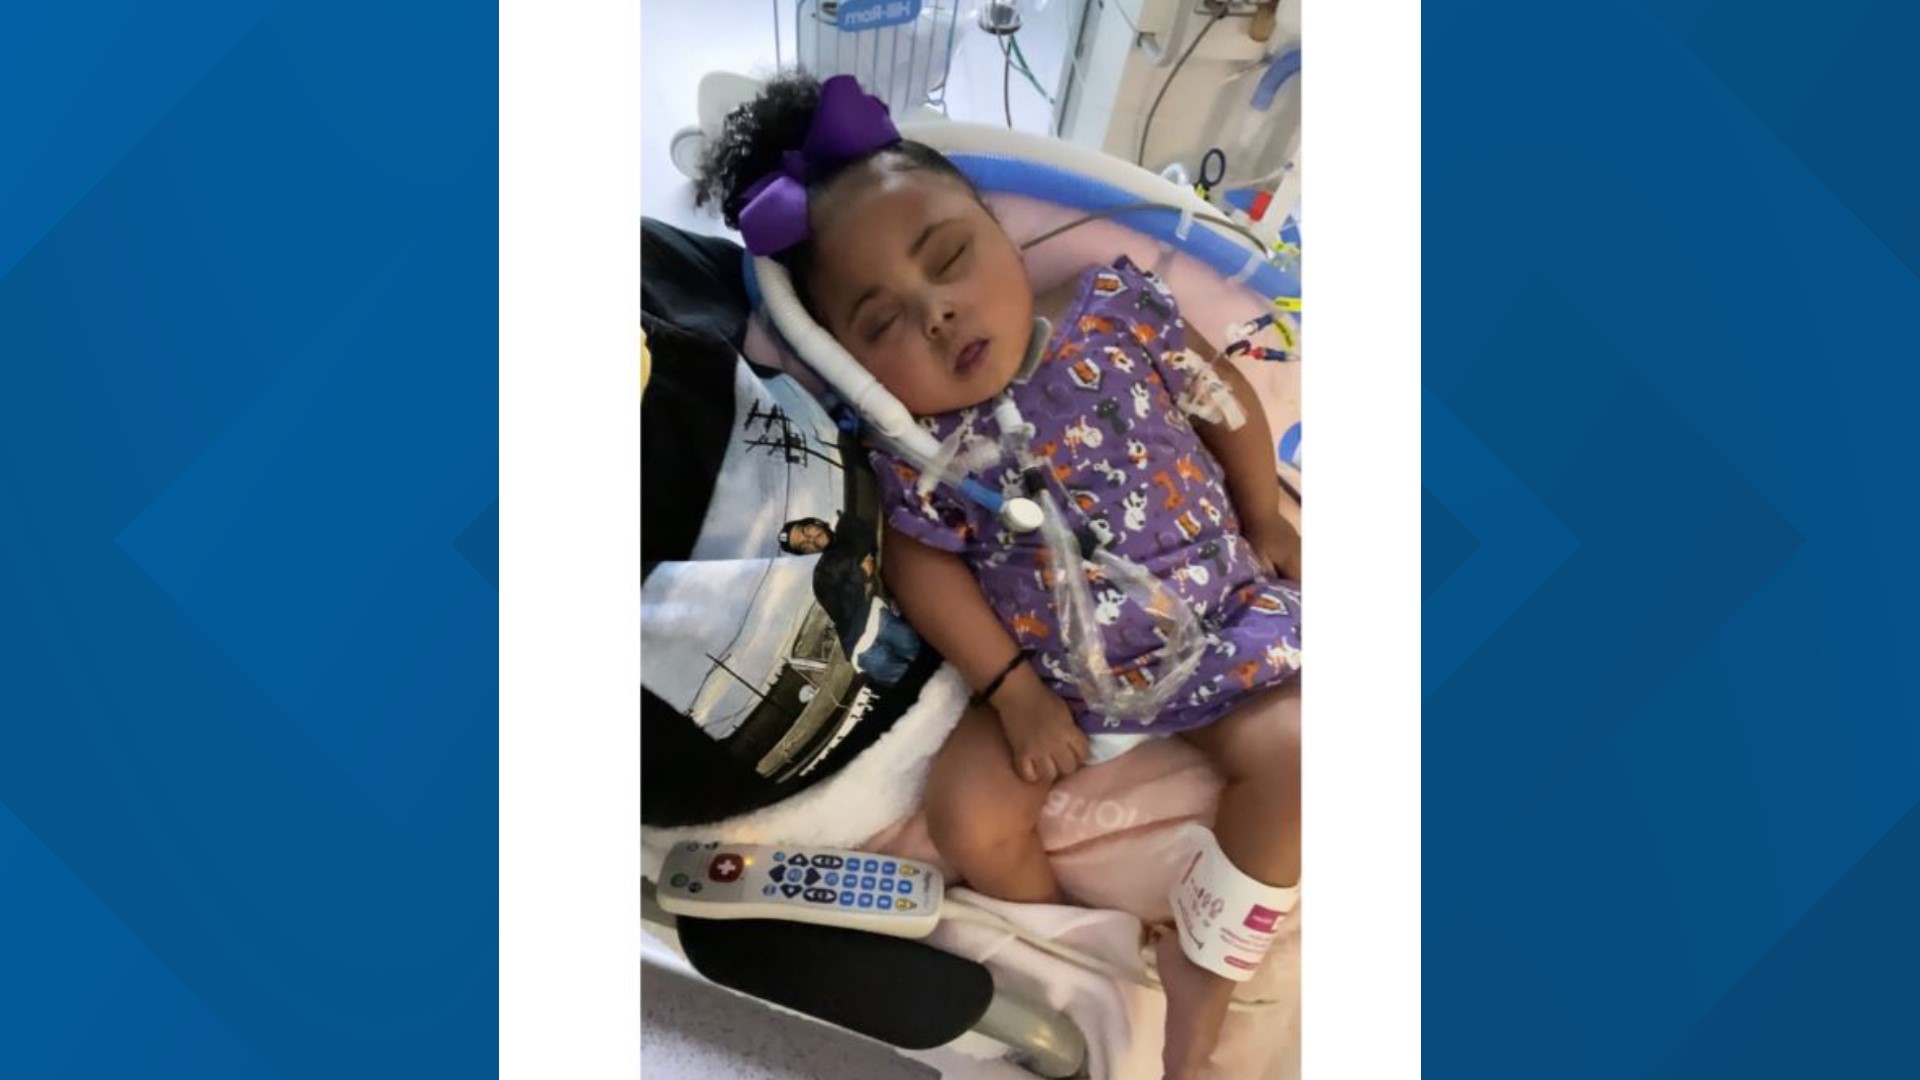 Tinslee Lewis was hospitalized at Cook Children's Medical Center since birth. After years of legal battle to keep her alive, her mom said she went home this week.